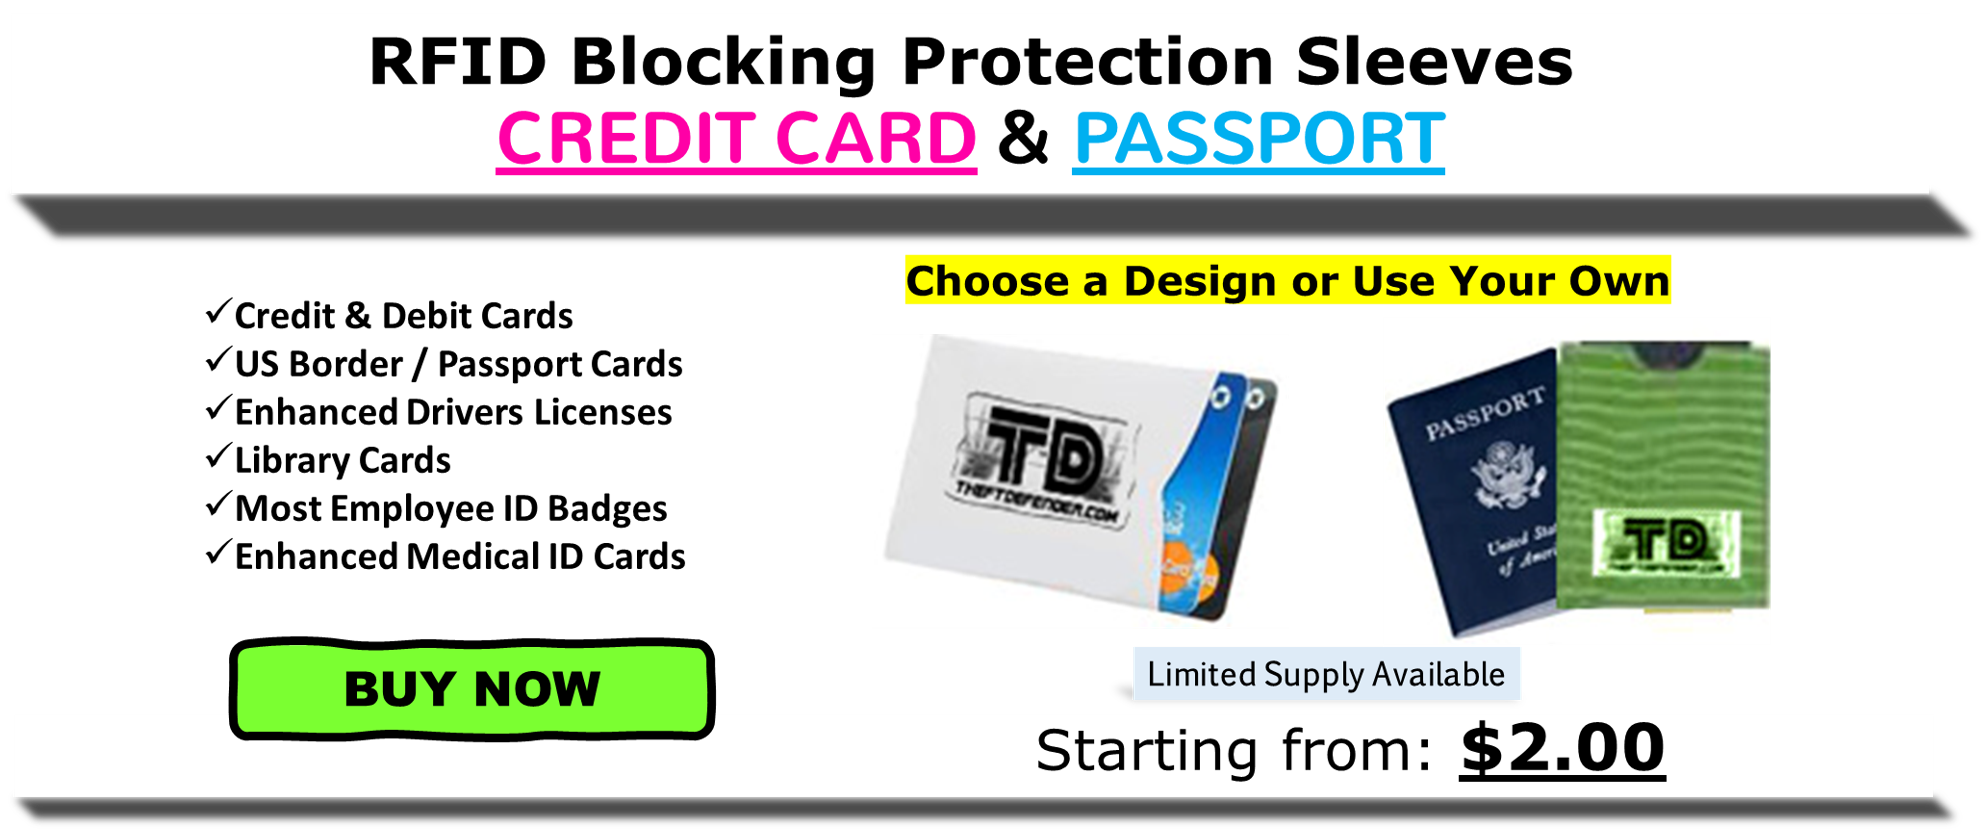 Shop TheftDefender Products | Security Sleeves for Credit Cards and Passports